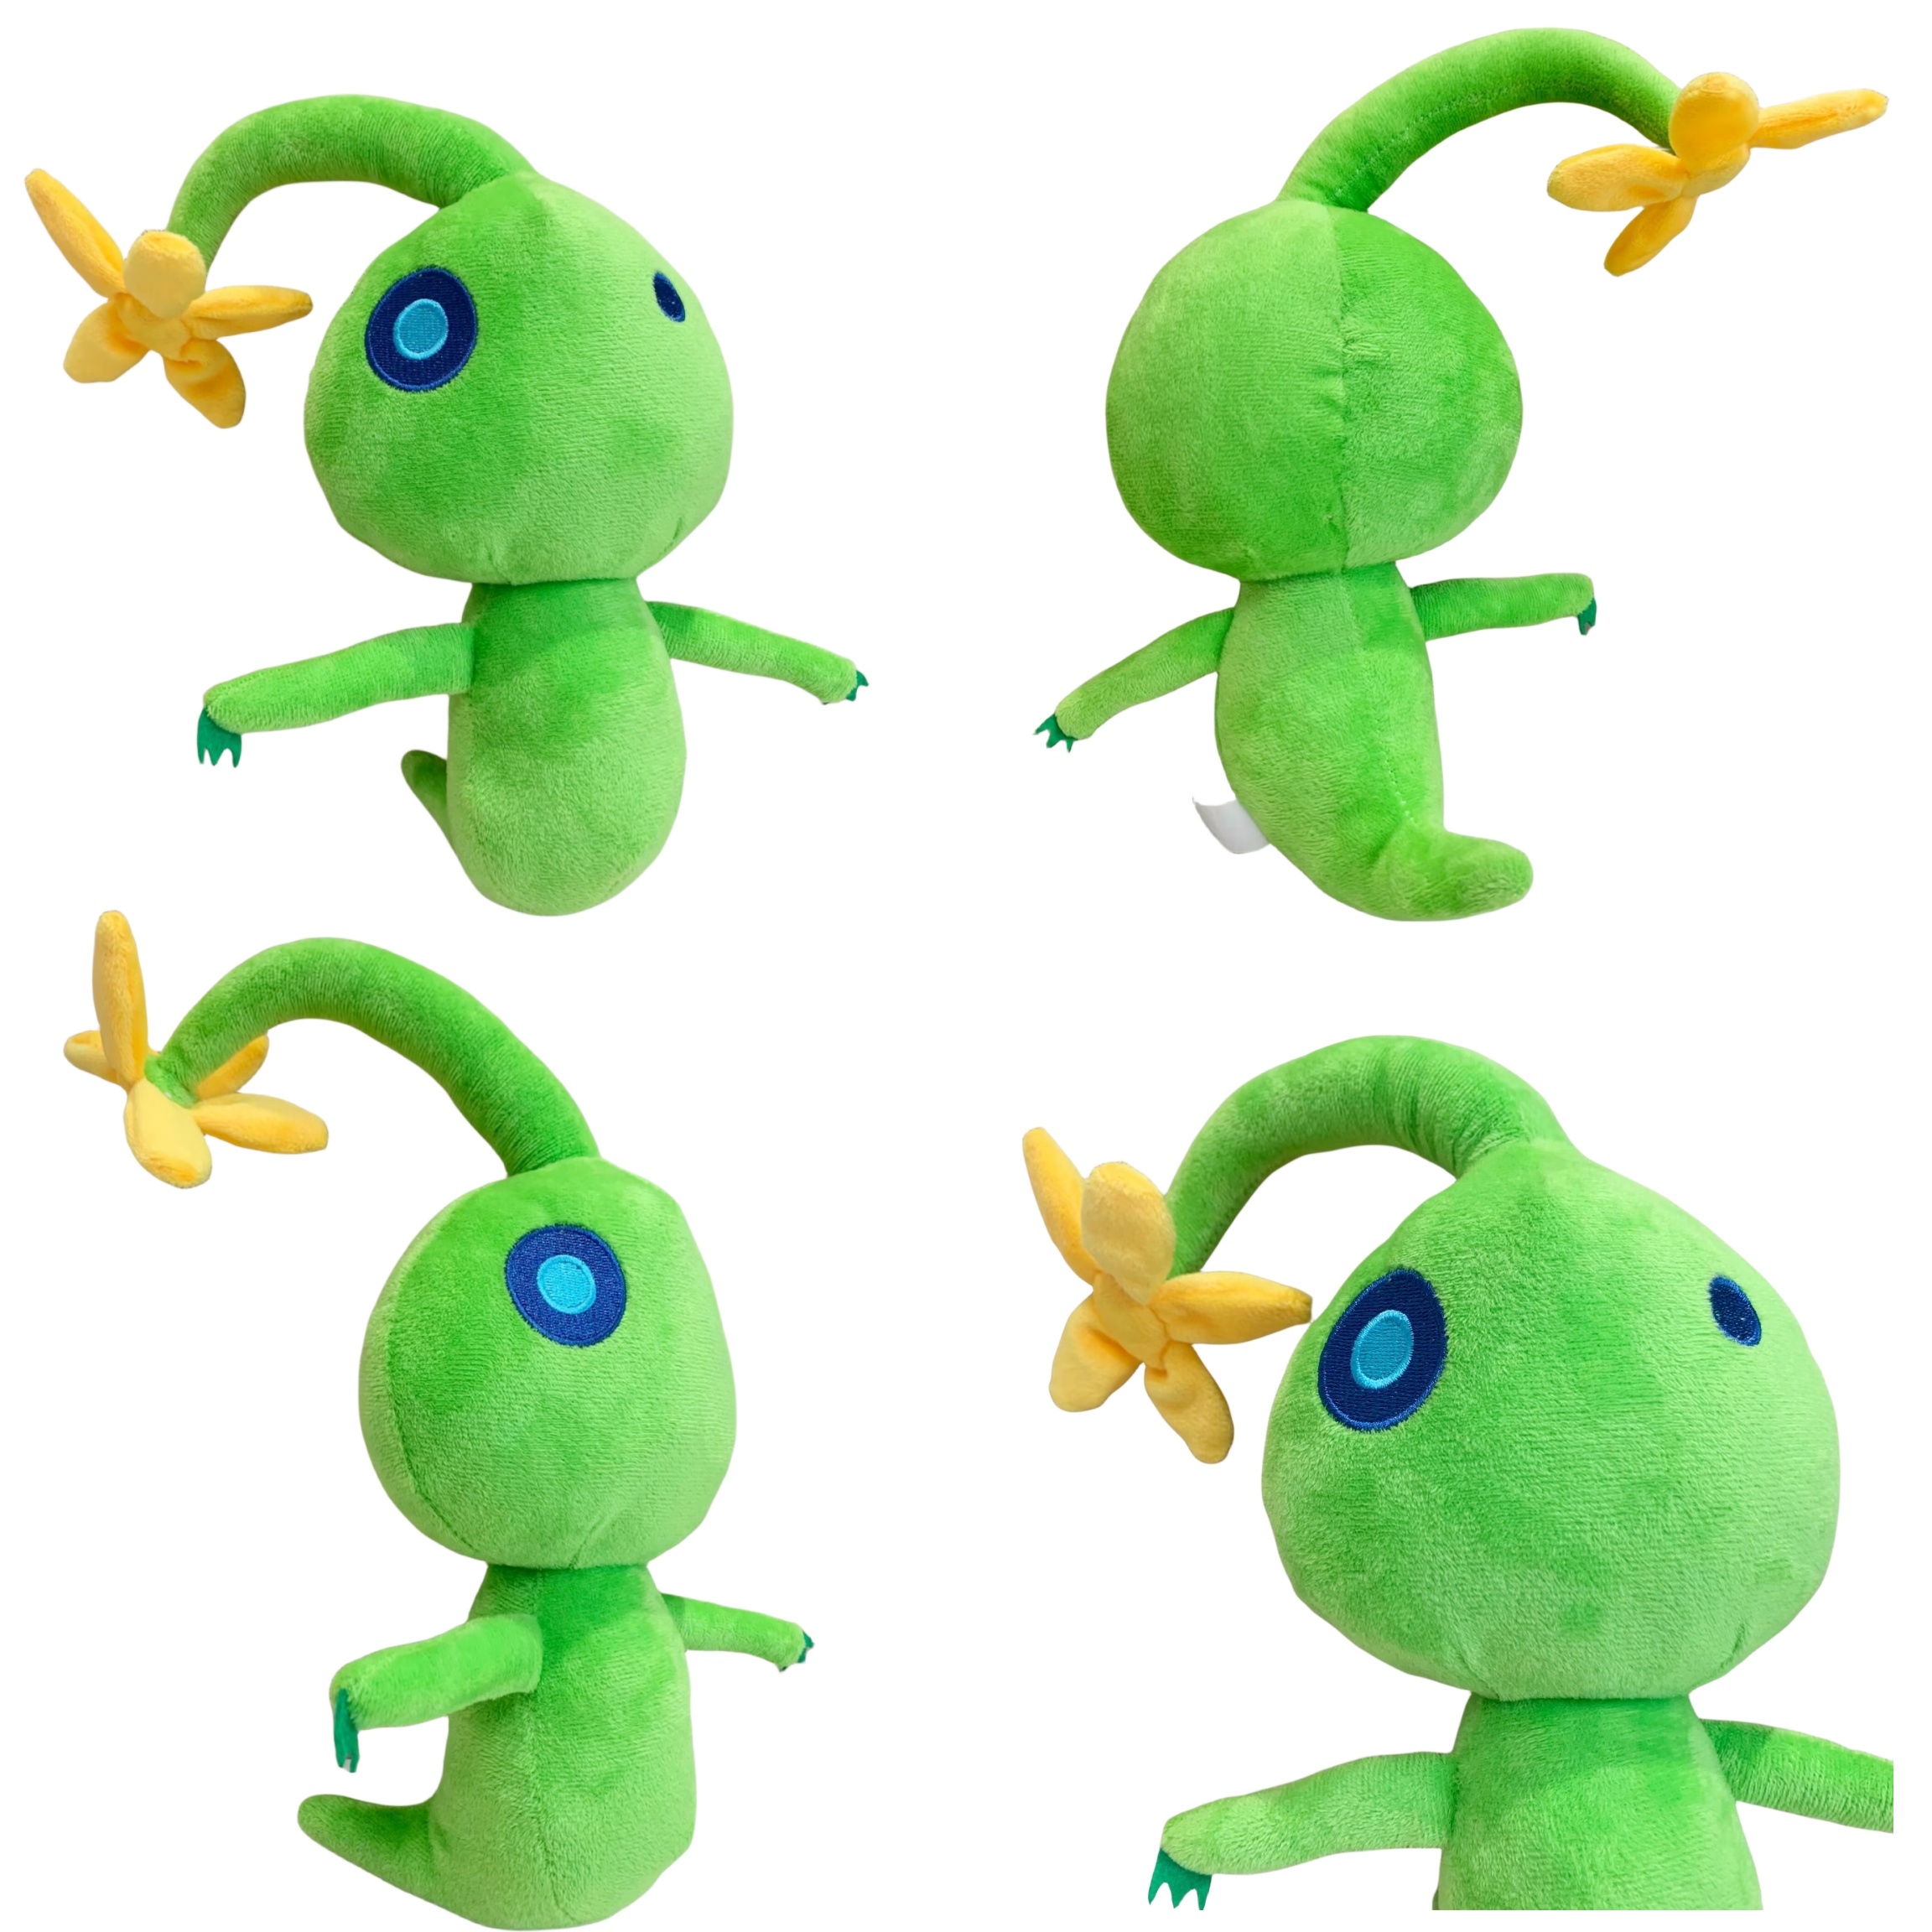 Cute and Creative Green Eyed Plush Toy - Perfect for Decorating and  Spoofing!